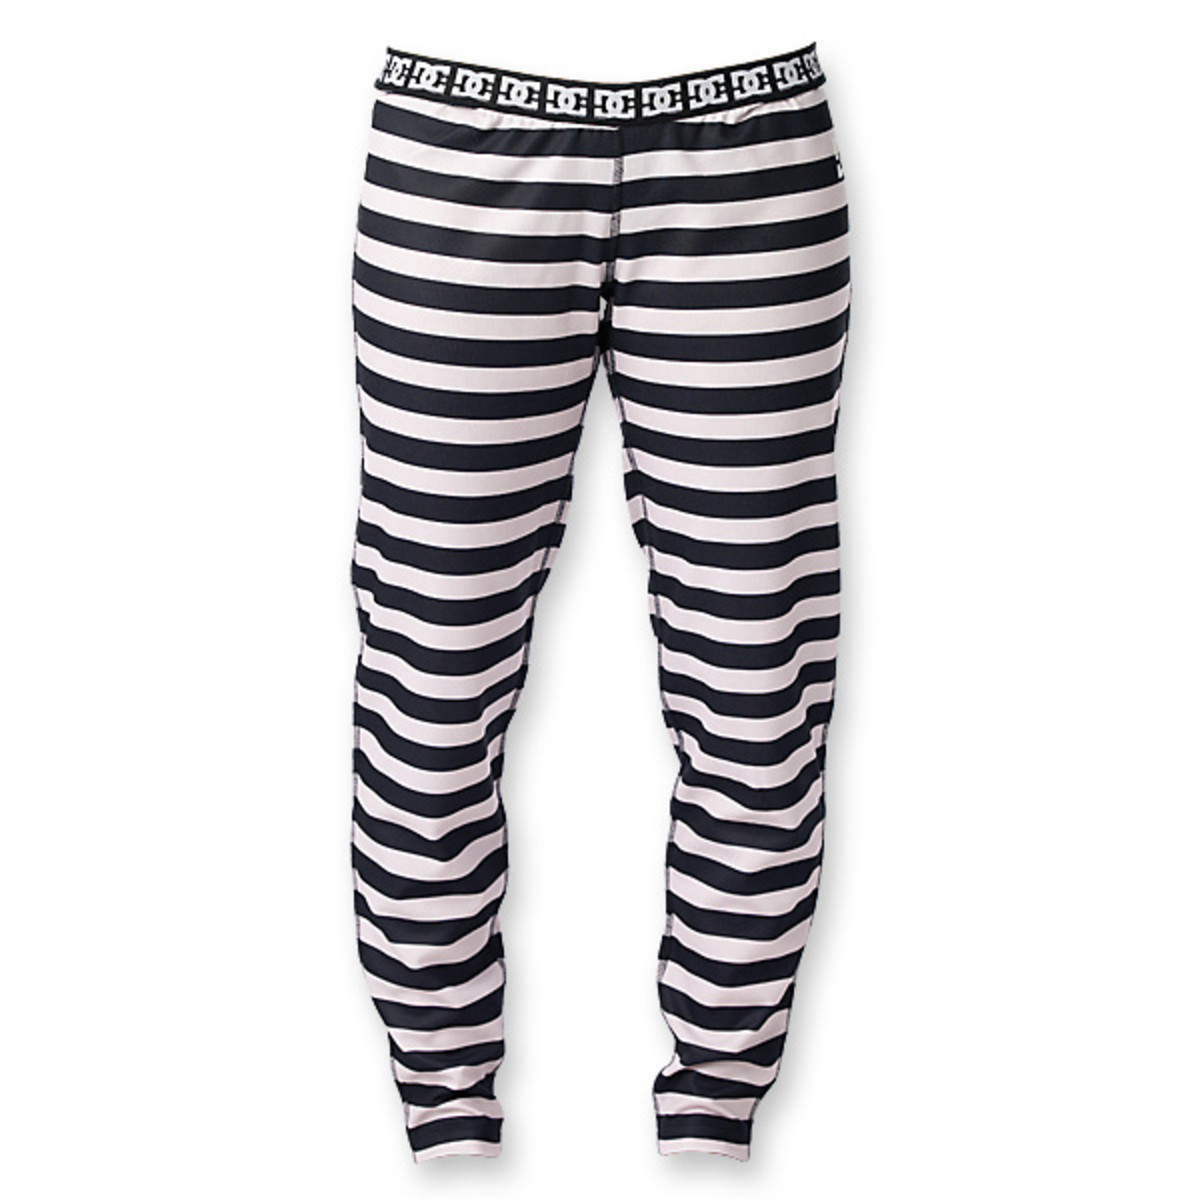 Buy DC Seema Pant- Shop for Snowboard Gear at Snowboarder Magazine ...